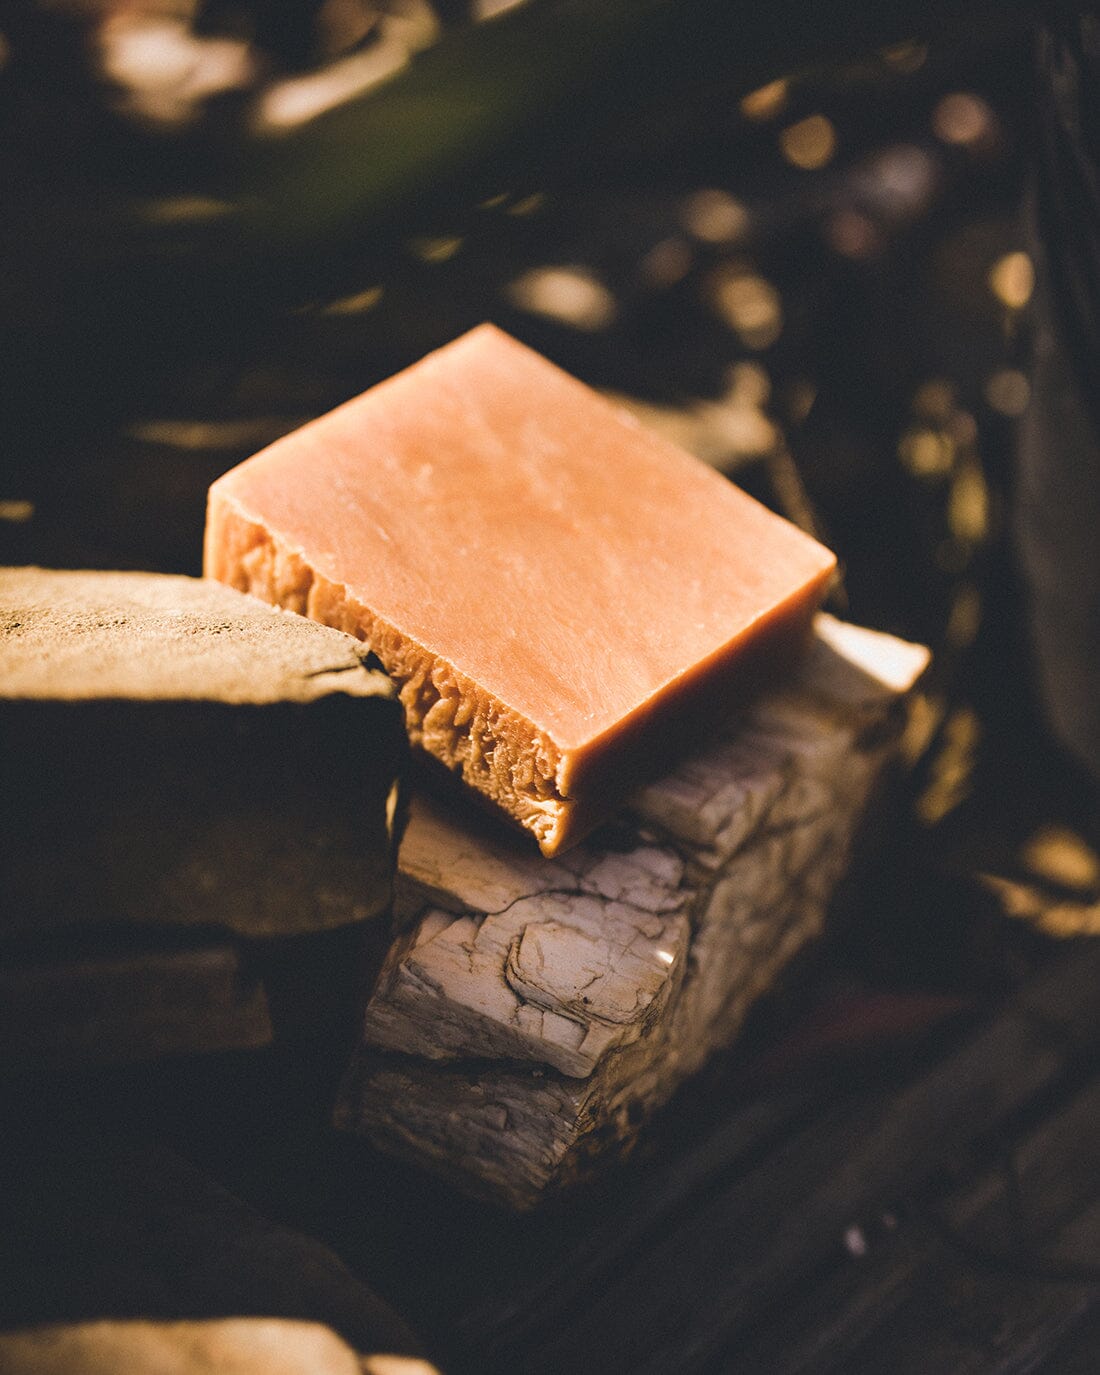  A bar of all-natural, anti-fungal, anti-bacterial soap from Iron Lion Soap placed on a rock near a garden bed.